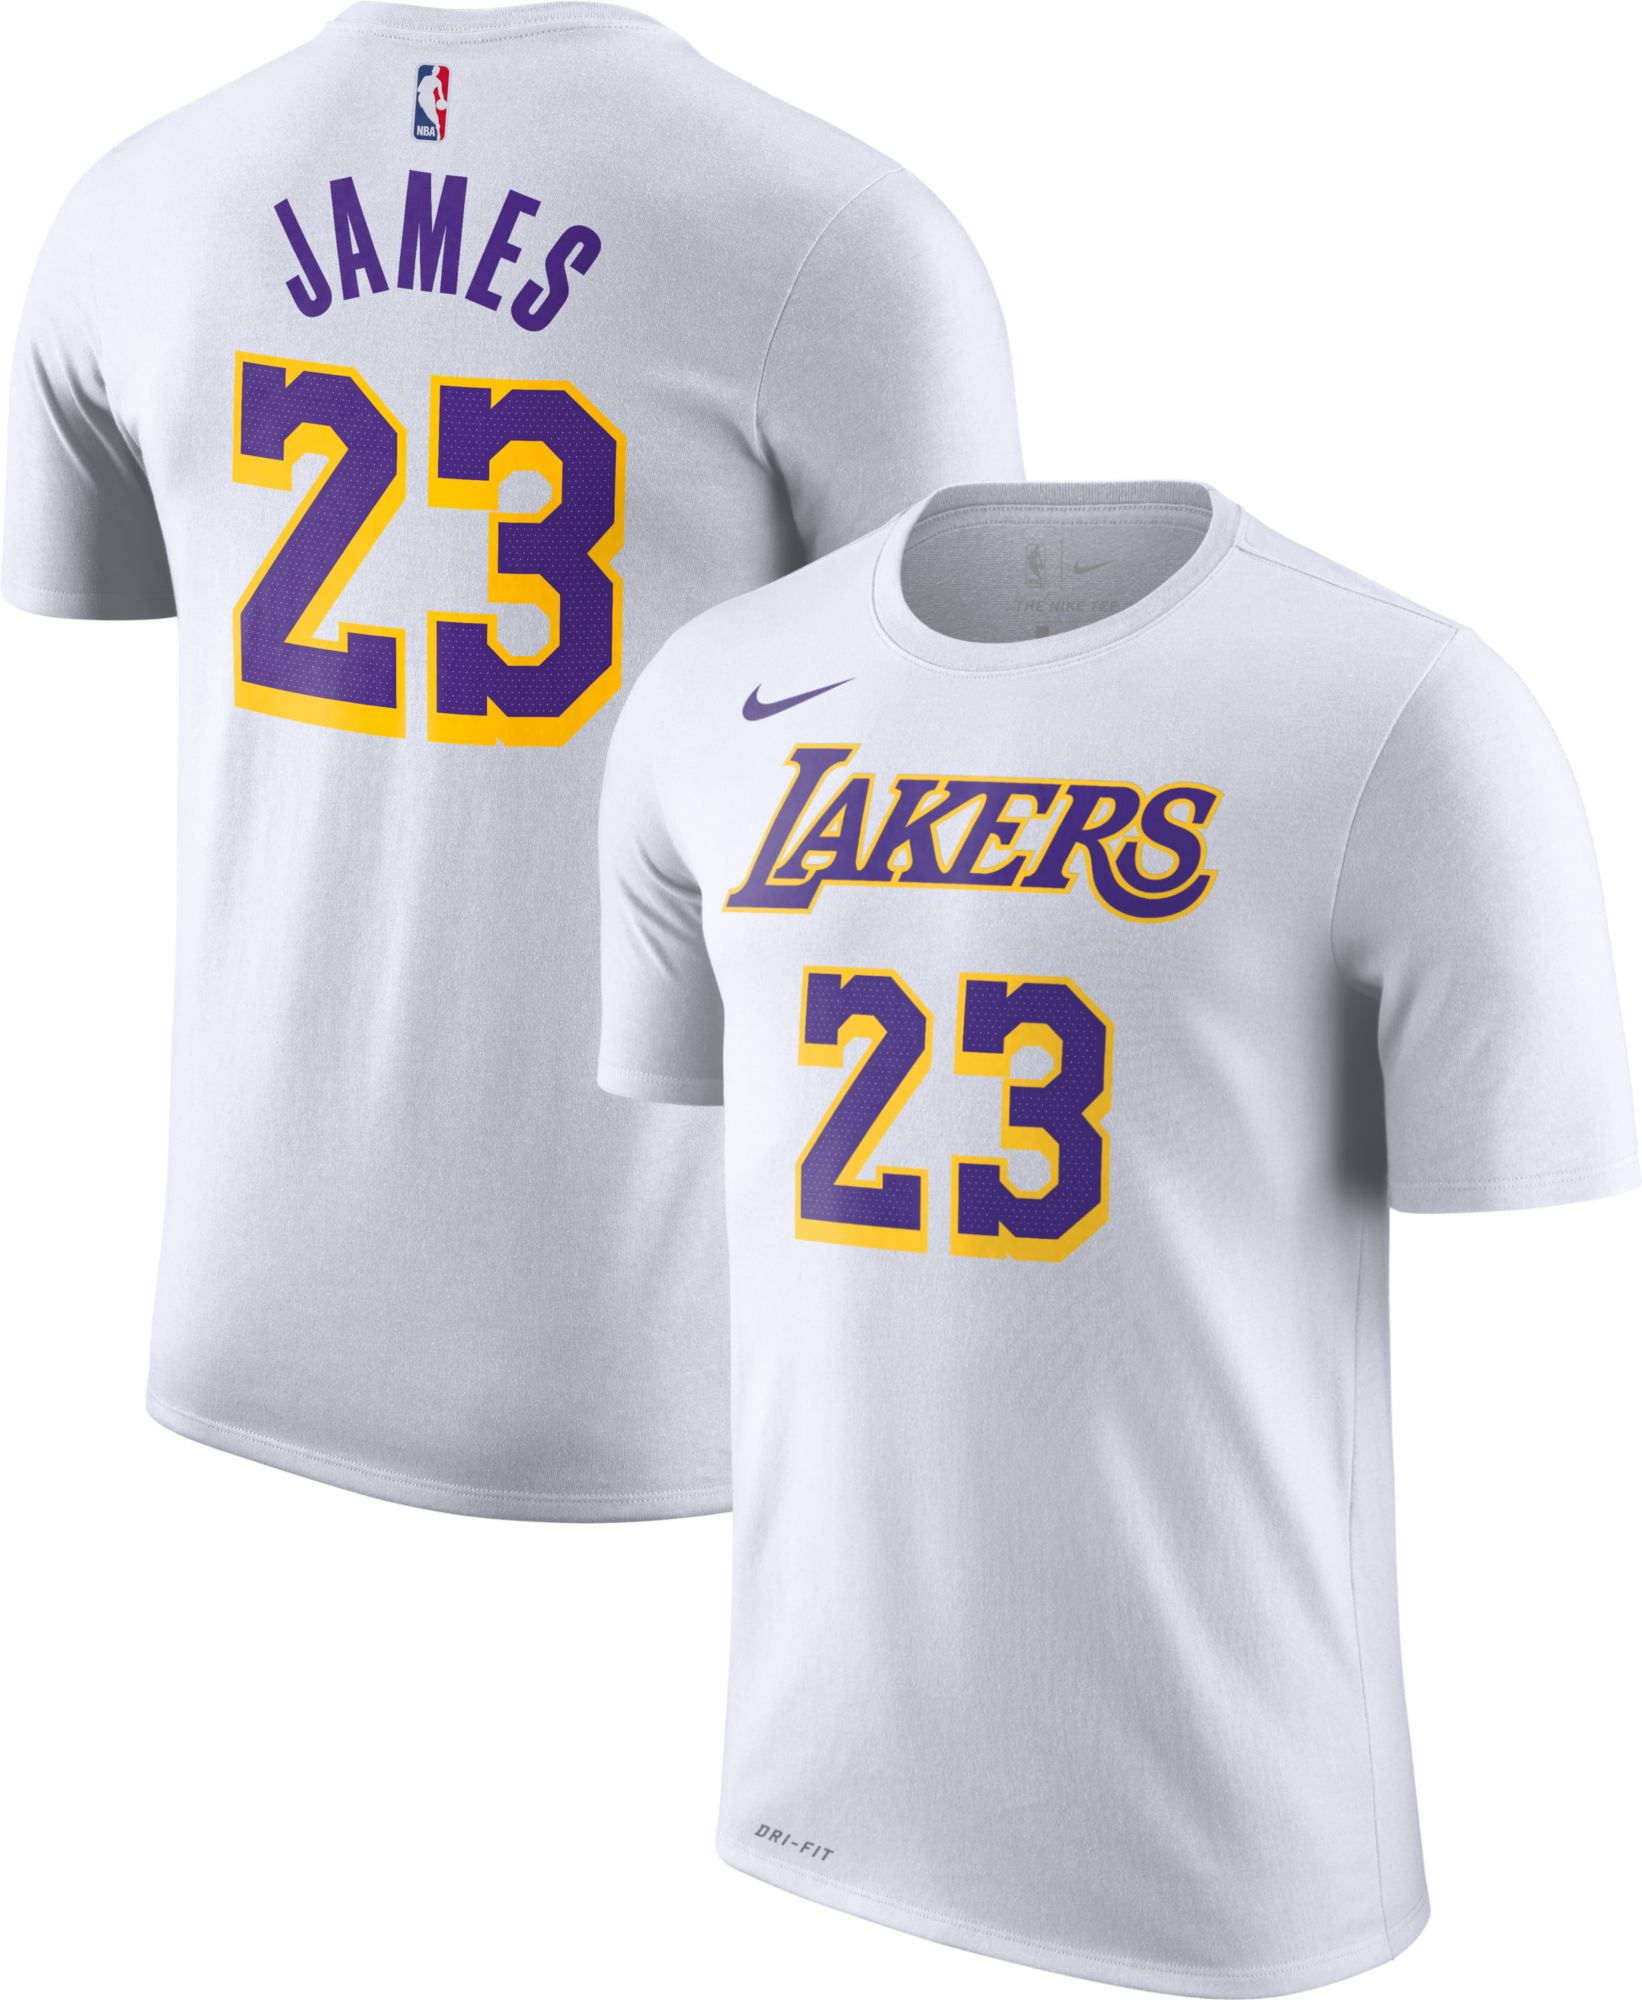 lebron james youth jersey lakers